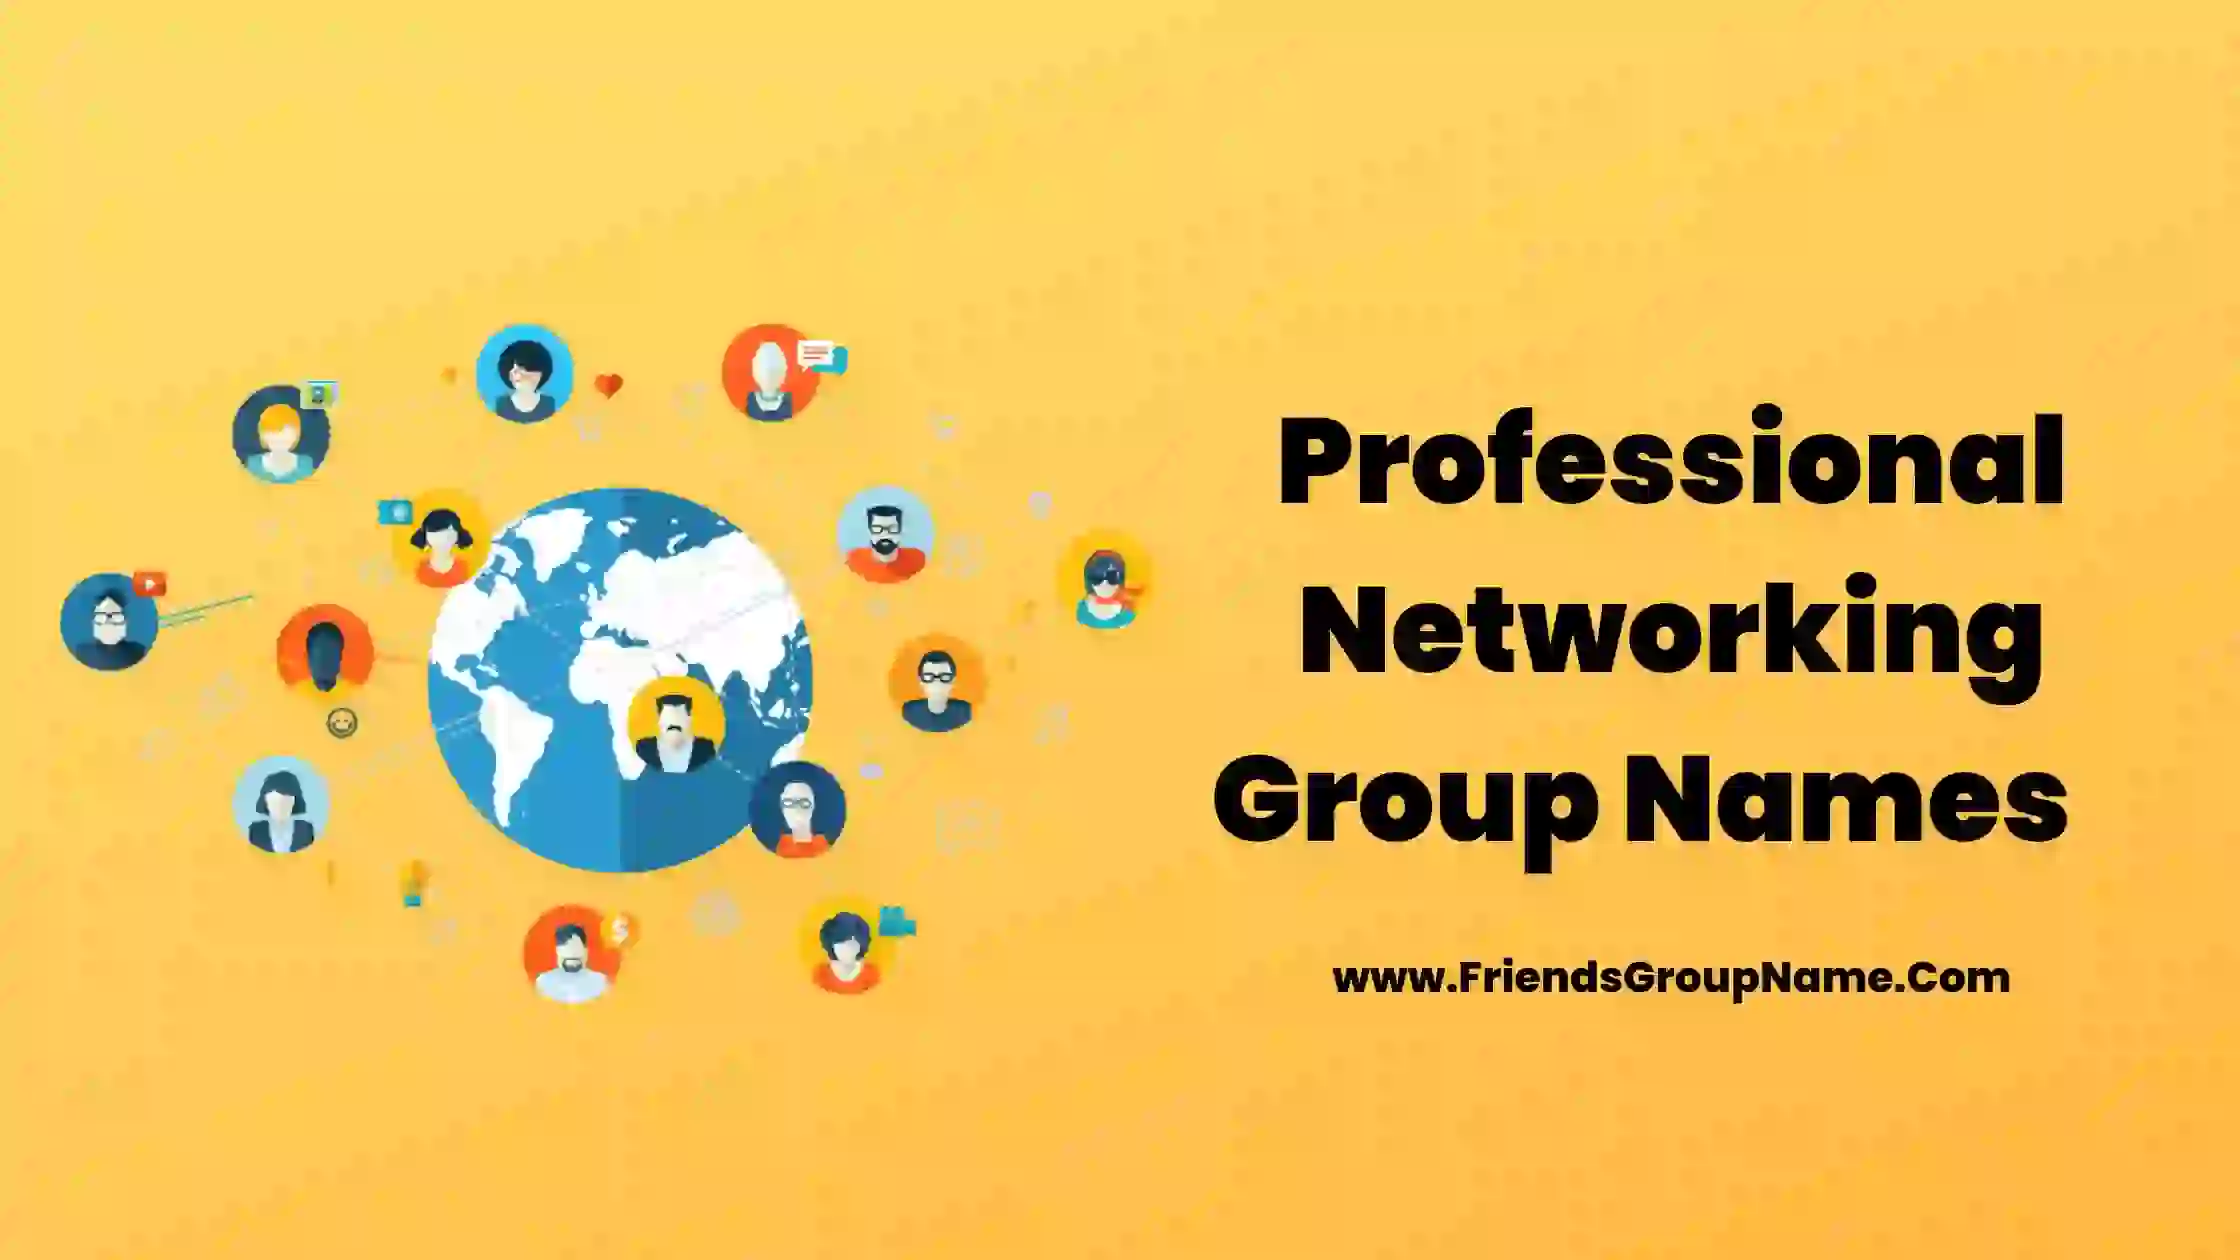 Professional Networking Group Names